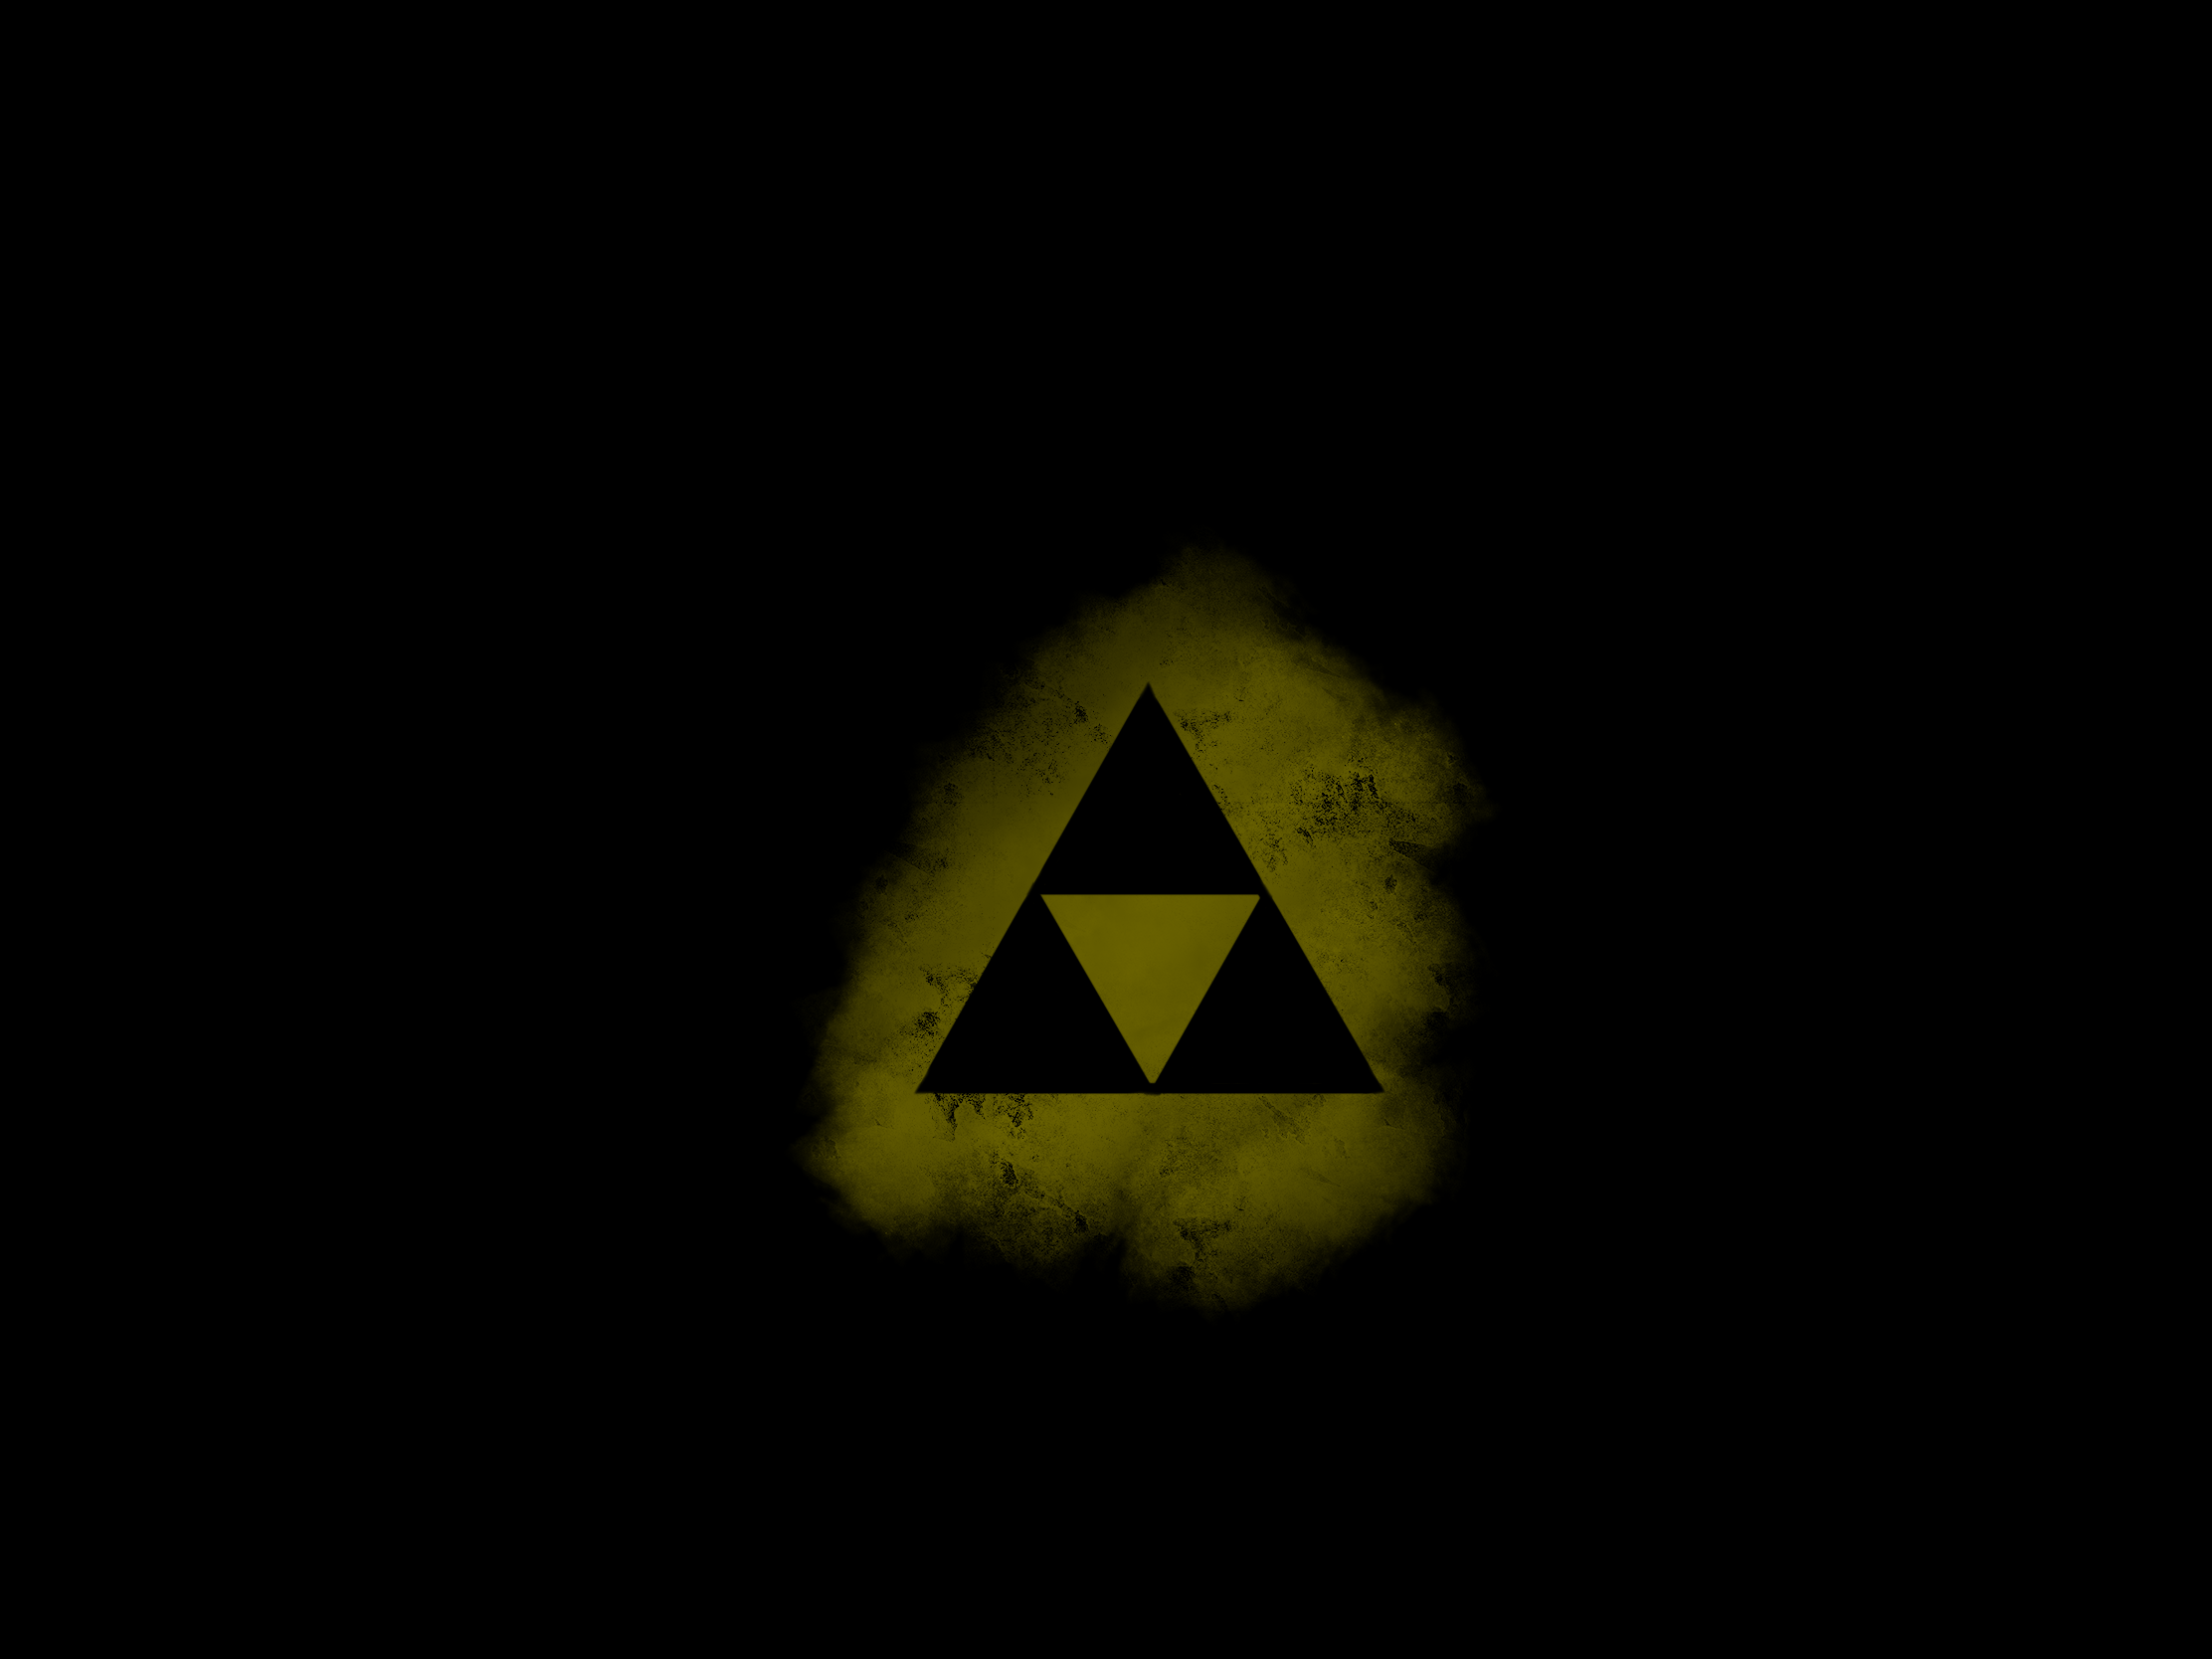 I did a simple triforce amoled wallpaper in class today, thought